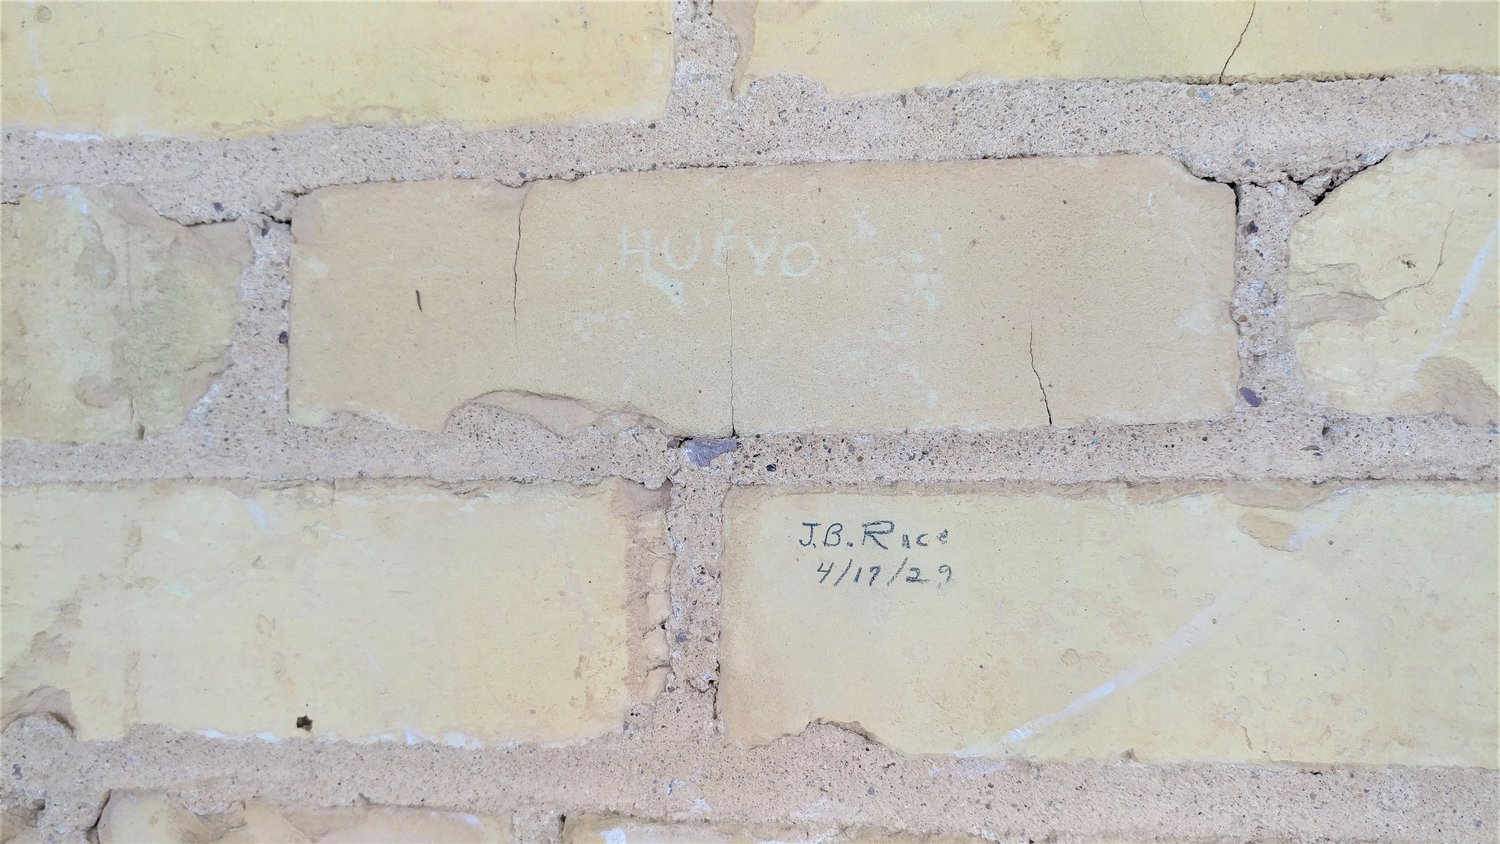 Some of the Hadley-Ludwick House’s original bricks with names written on them that may be a hundred or more years old.